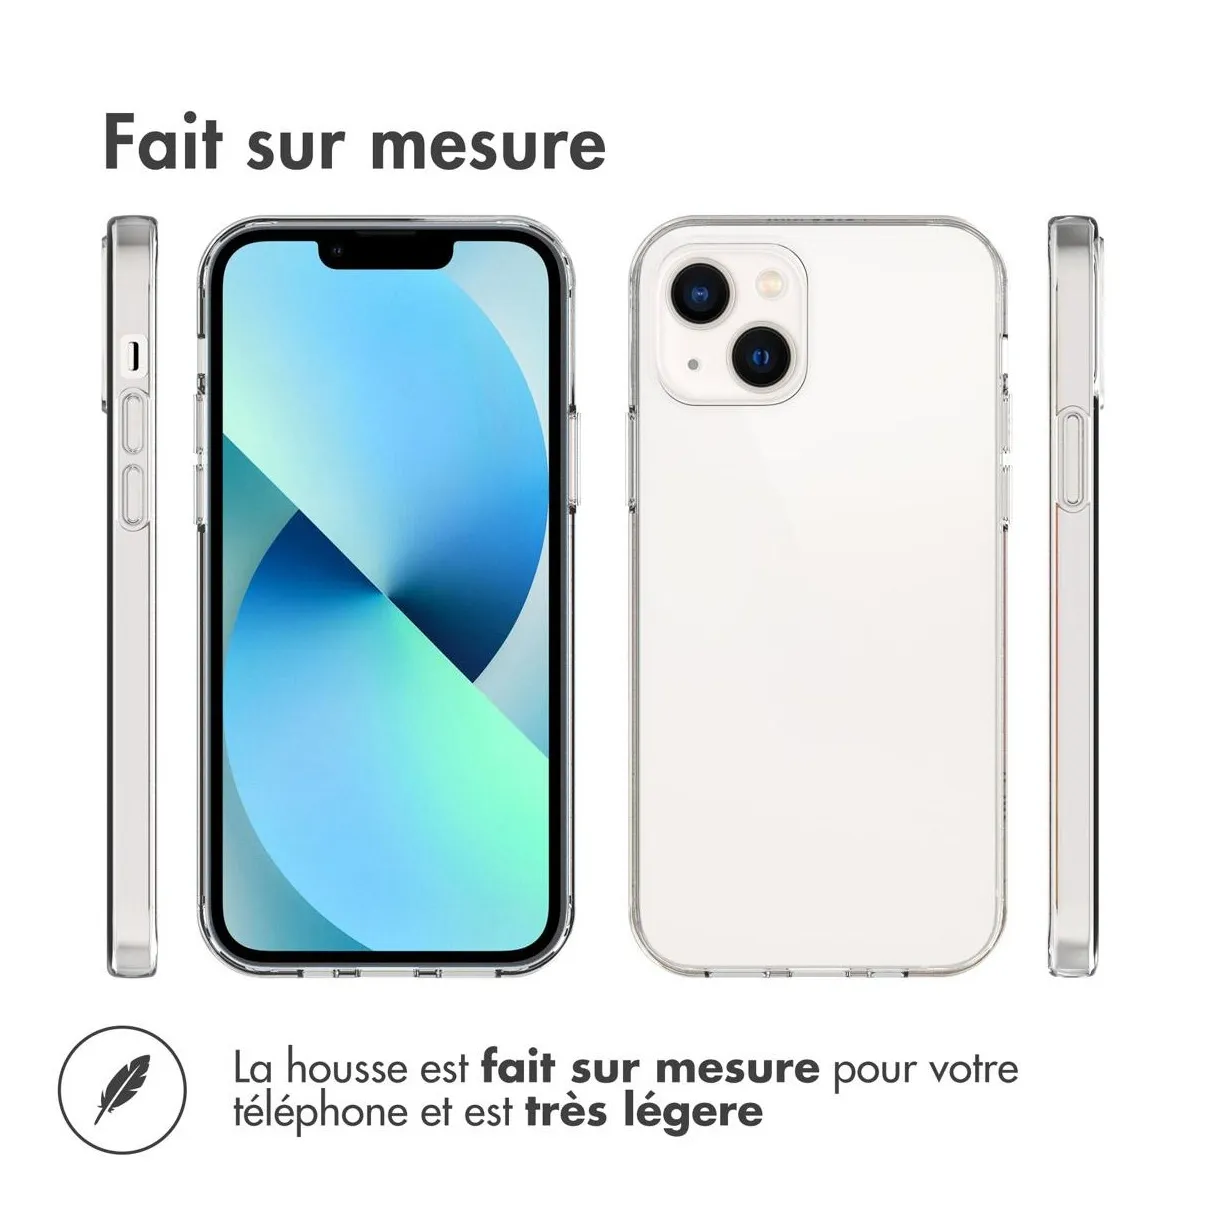 Accezz Clear Case voor Apple iPhone 13 Transparant